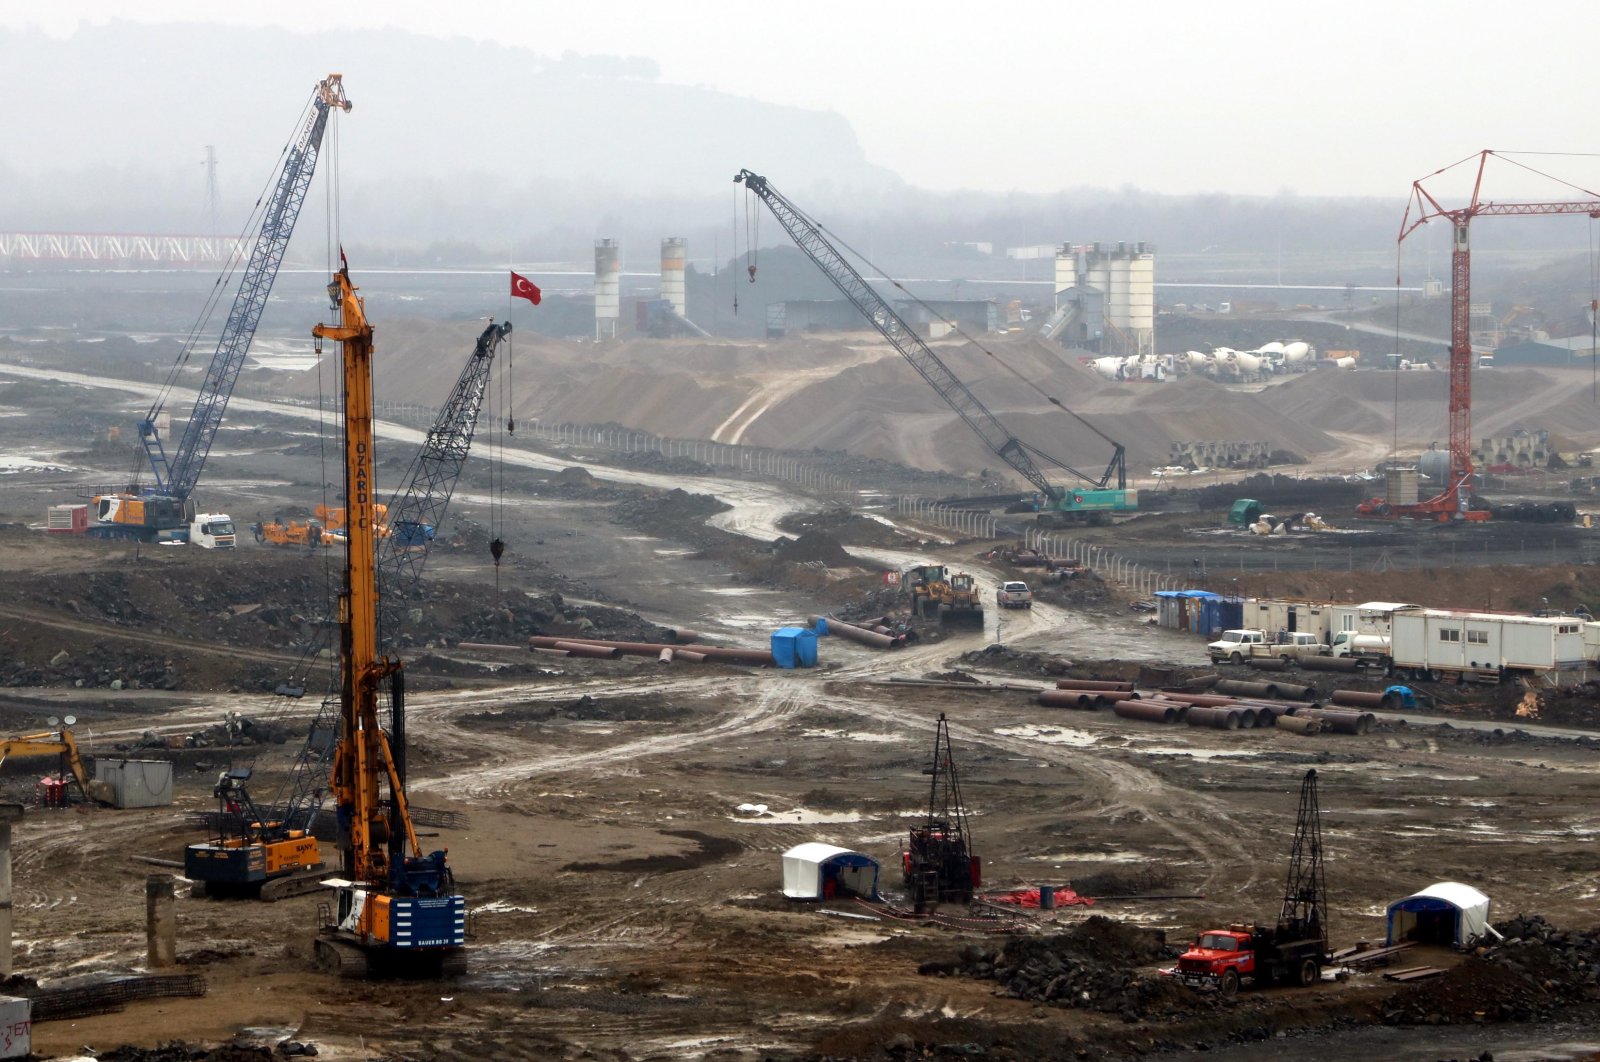 A view of the Port of Filyon where Black Sea gas will be brought ashore, Zonguldak, Turkey, Jan. 1, 2022. (DHA Photo)